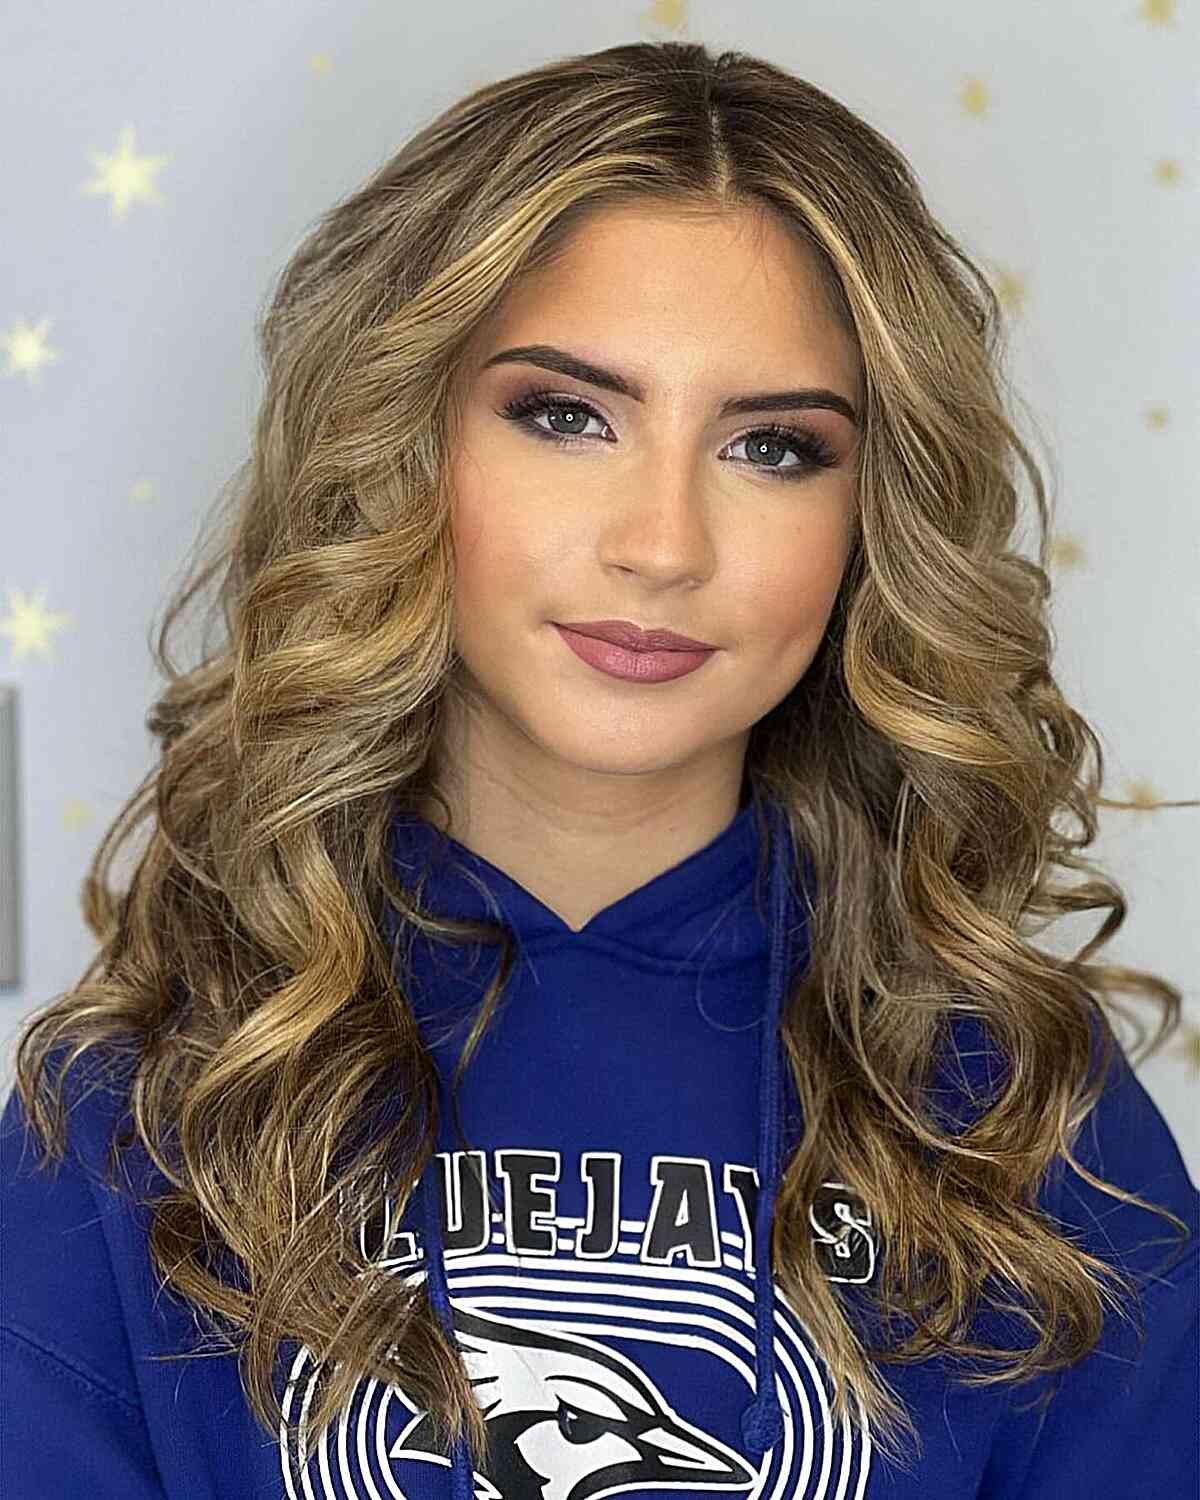 Center-Parted Medium Curled Hairstyle for Prom Queens